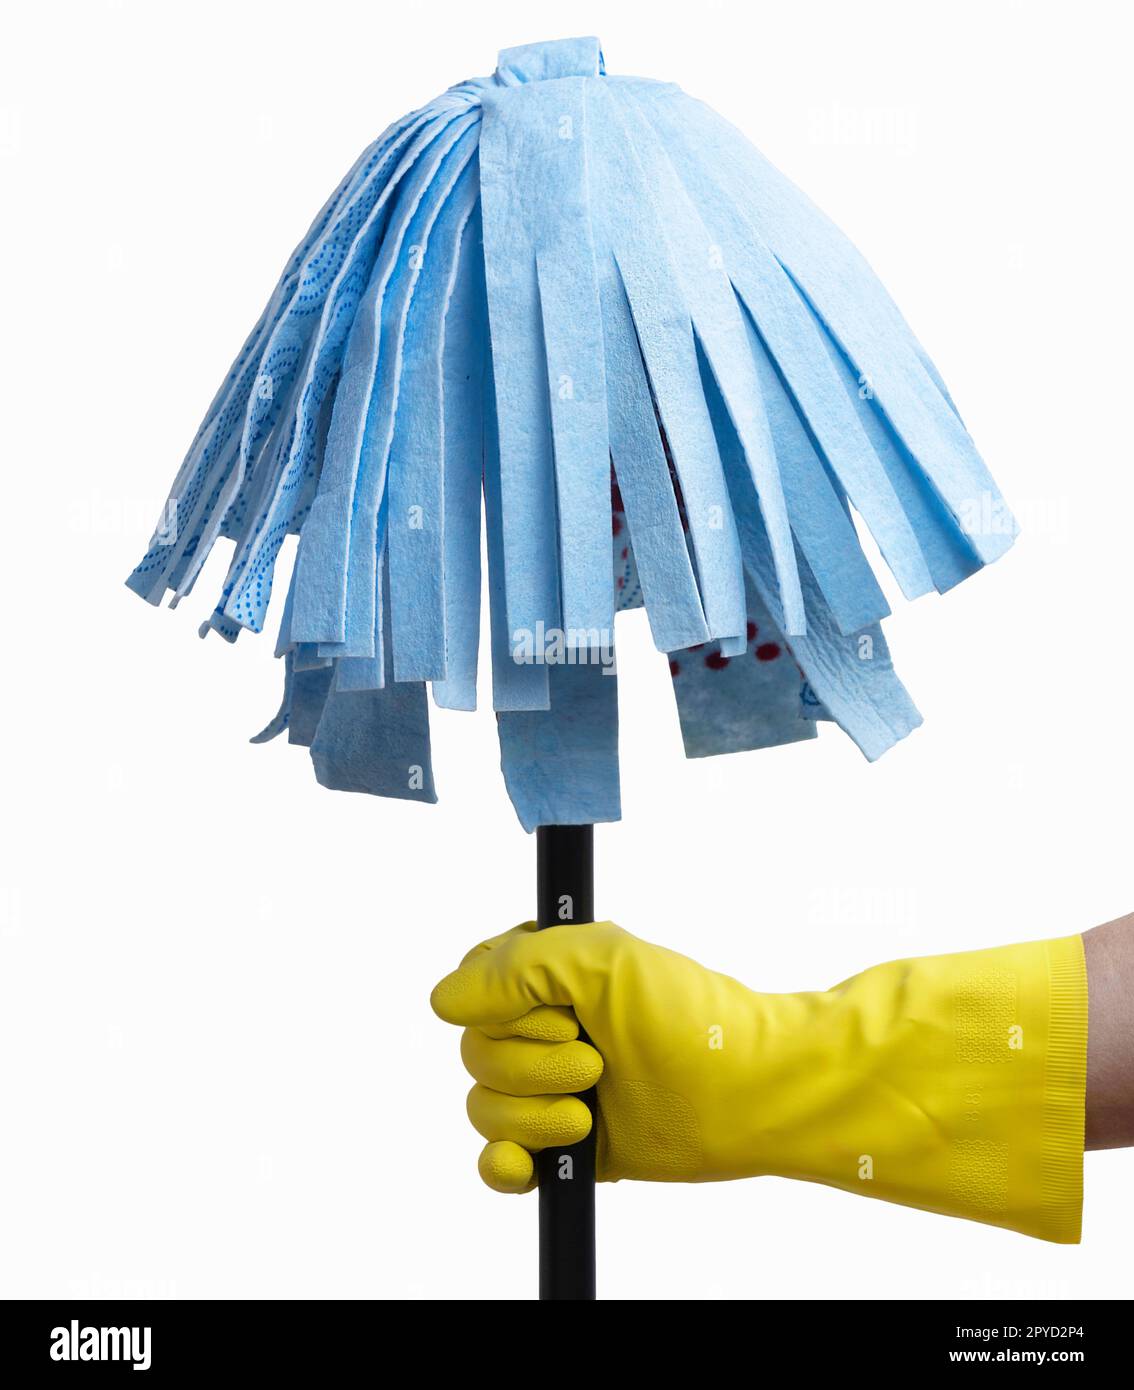 Premium Photo  Wife housekeeping and cleaning concept, happy young woman  in blue rubber gloves wiping dust using a spray and a duster while cleaning  on floor at home